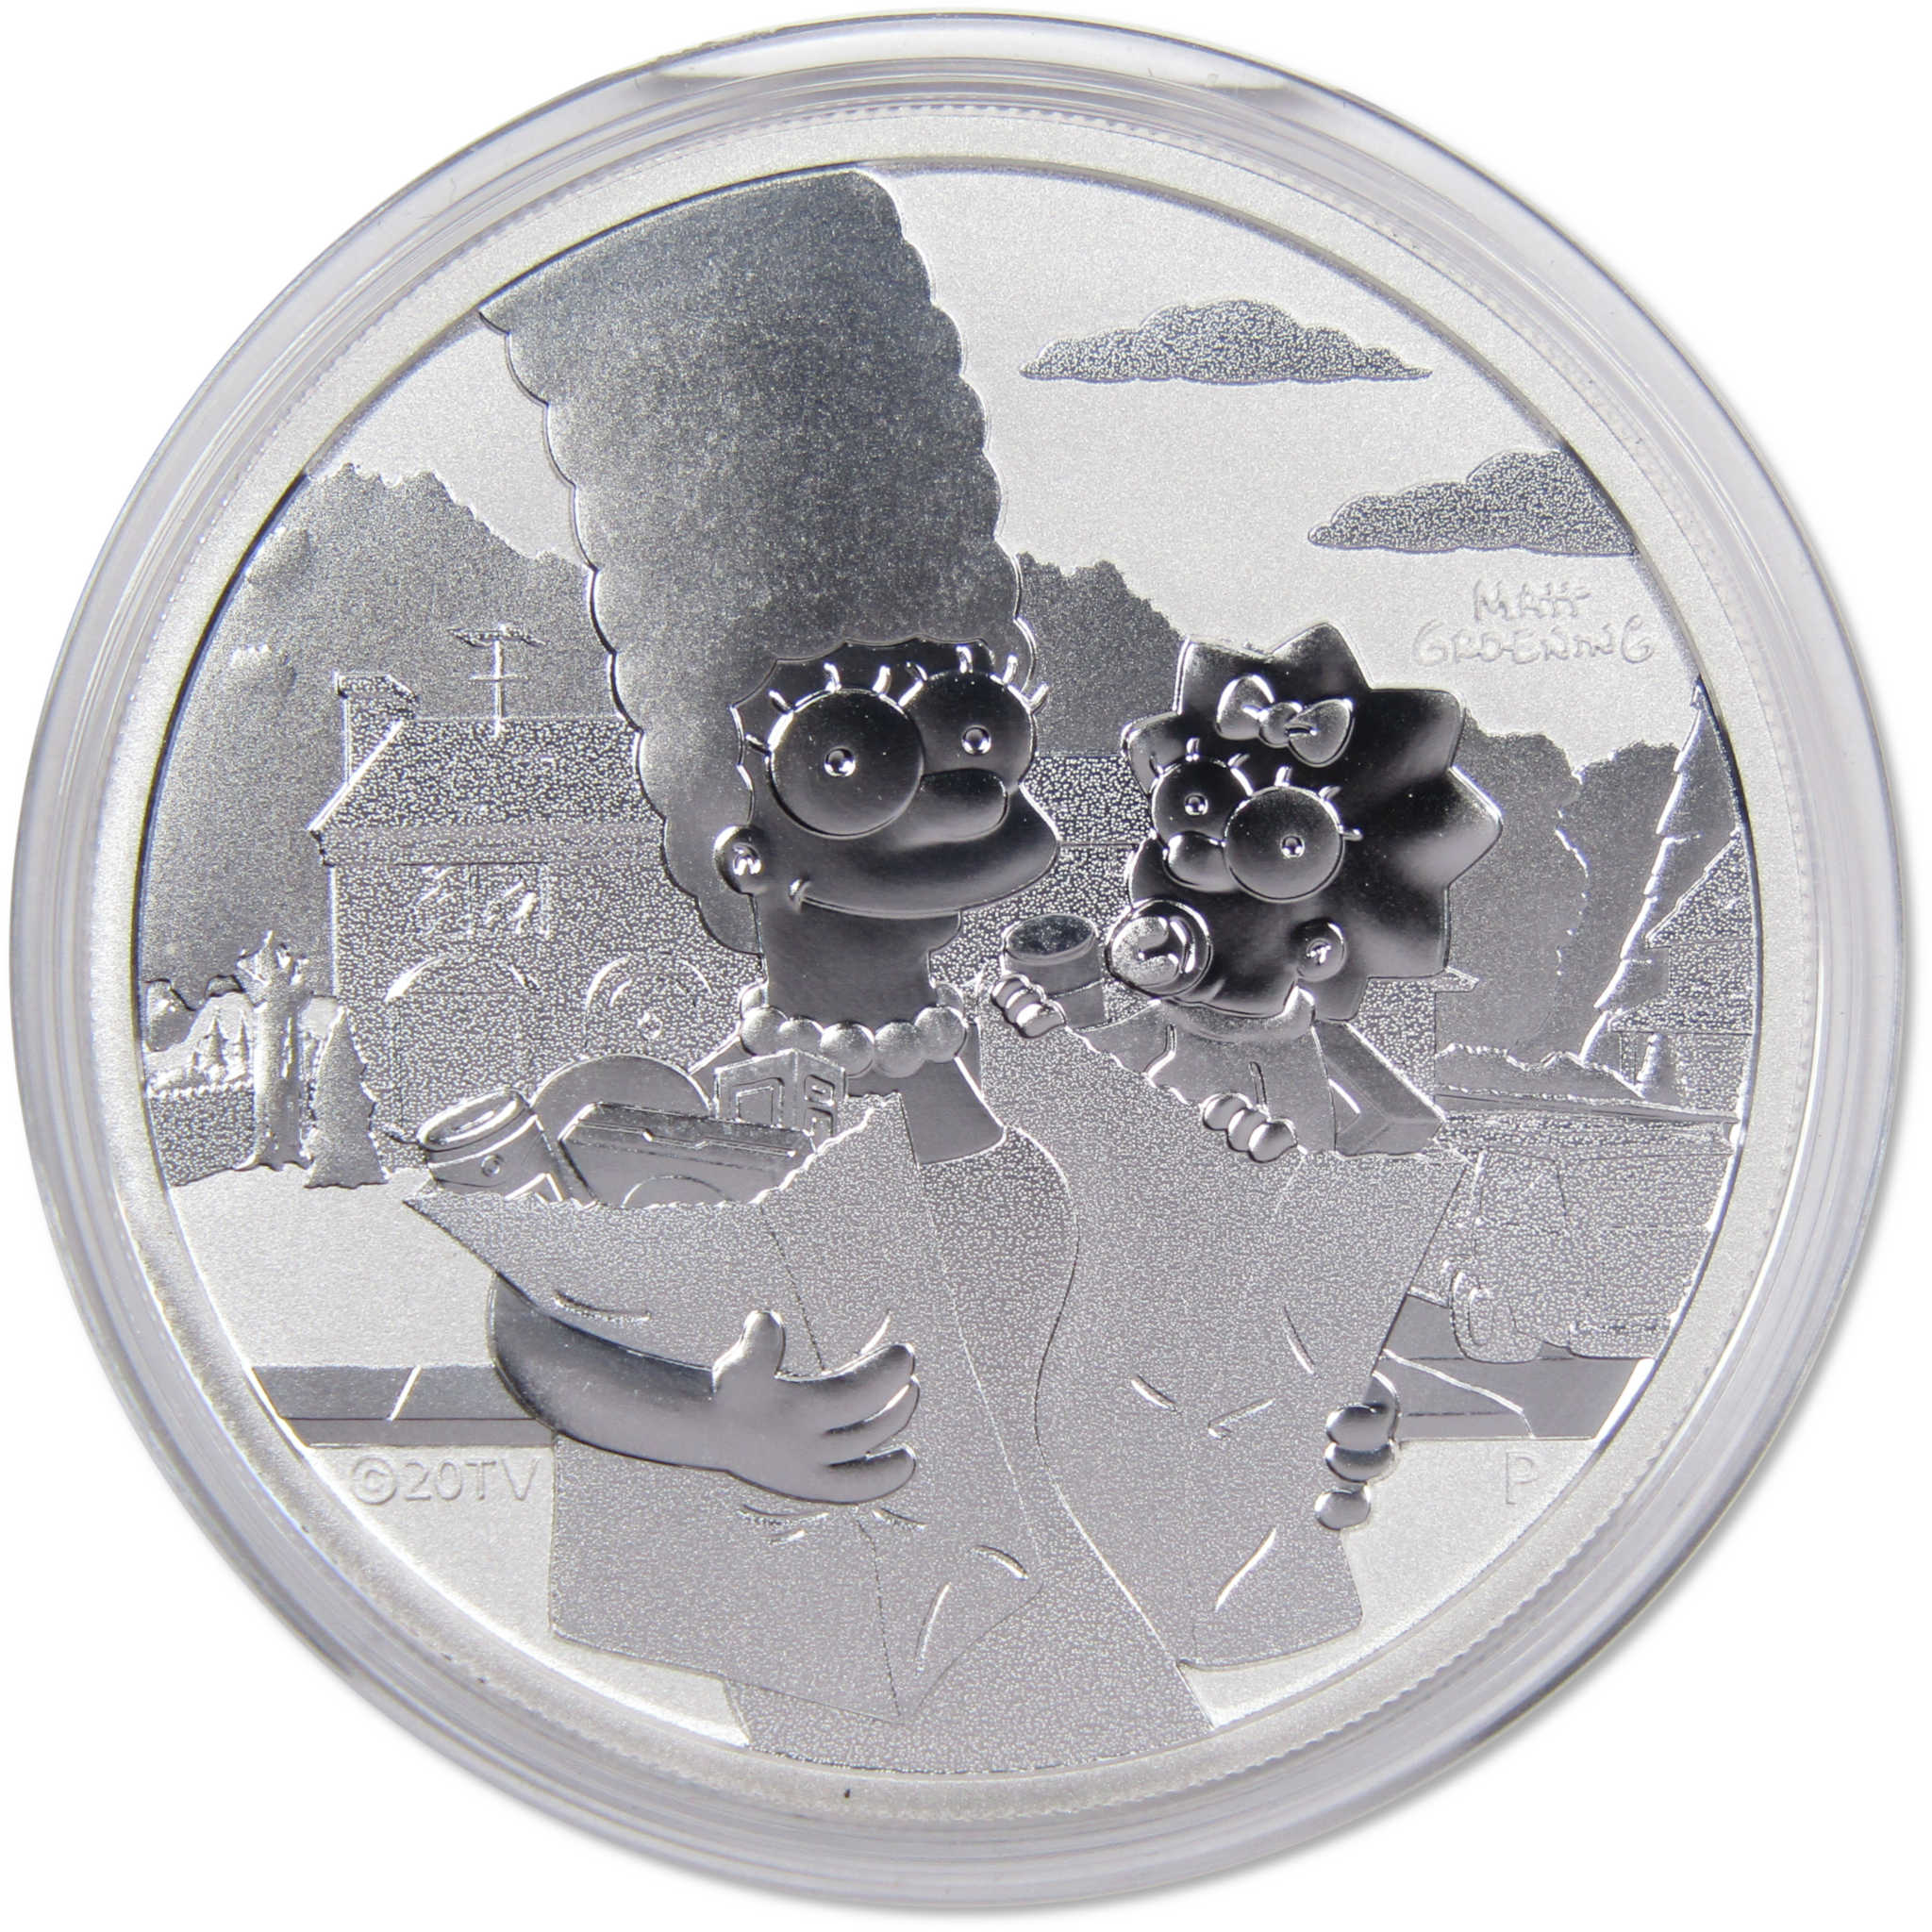 The Simpsons Marge & Maggie BU 1 oz .9999 Fine Silver $1 Coin 2021 Tuvalu